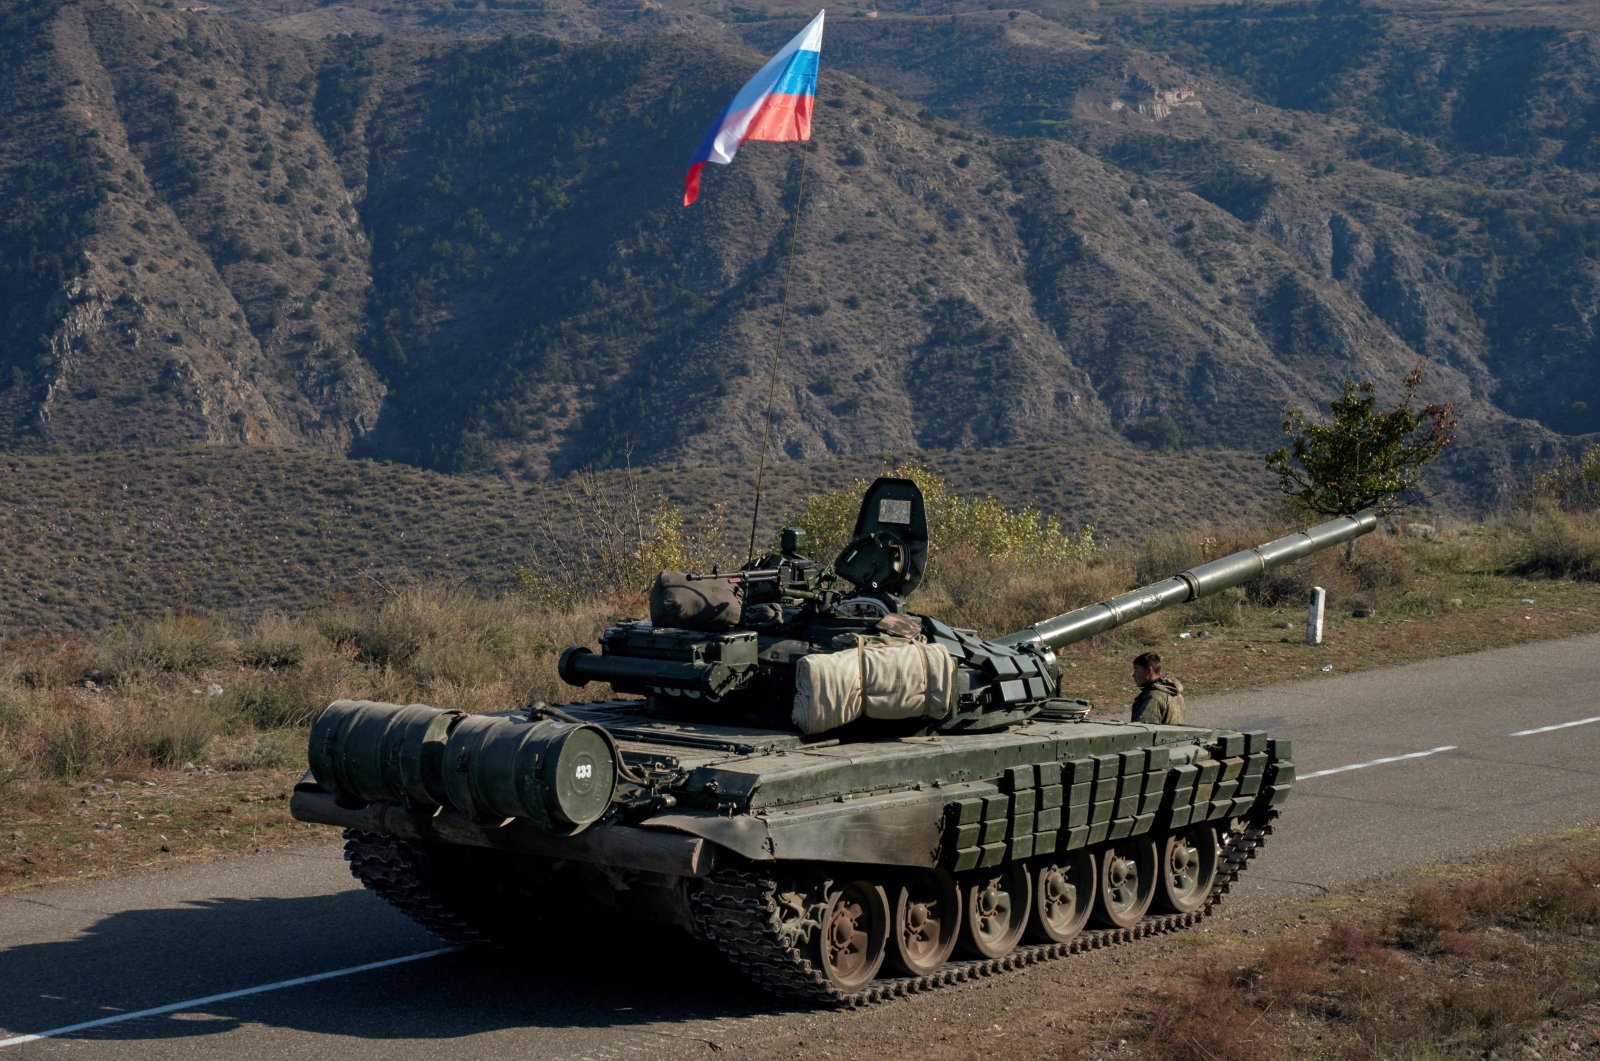 A service member of the Russian peacekeeping troops stands next to a tank near the border with Armenia, following the signing of a deal to end the military conflict between Azerbaijan and ethnic Armenian forces, in the region of Nagorno-Karabakh, Nov. 10, 2020. (Reuters File Photo)